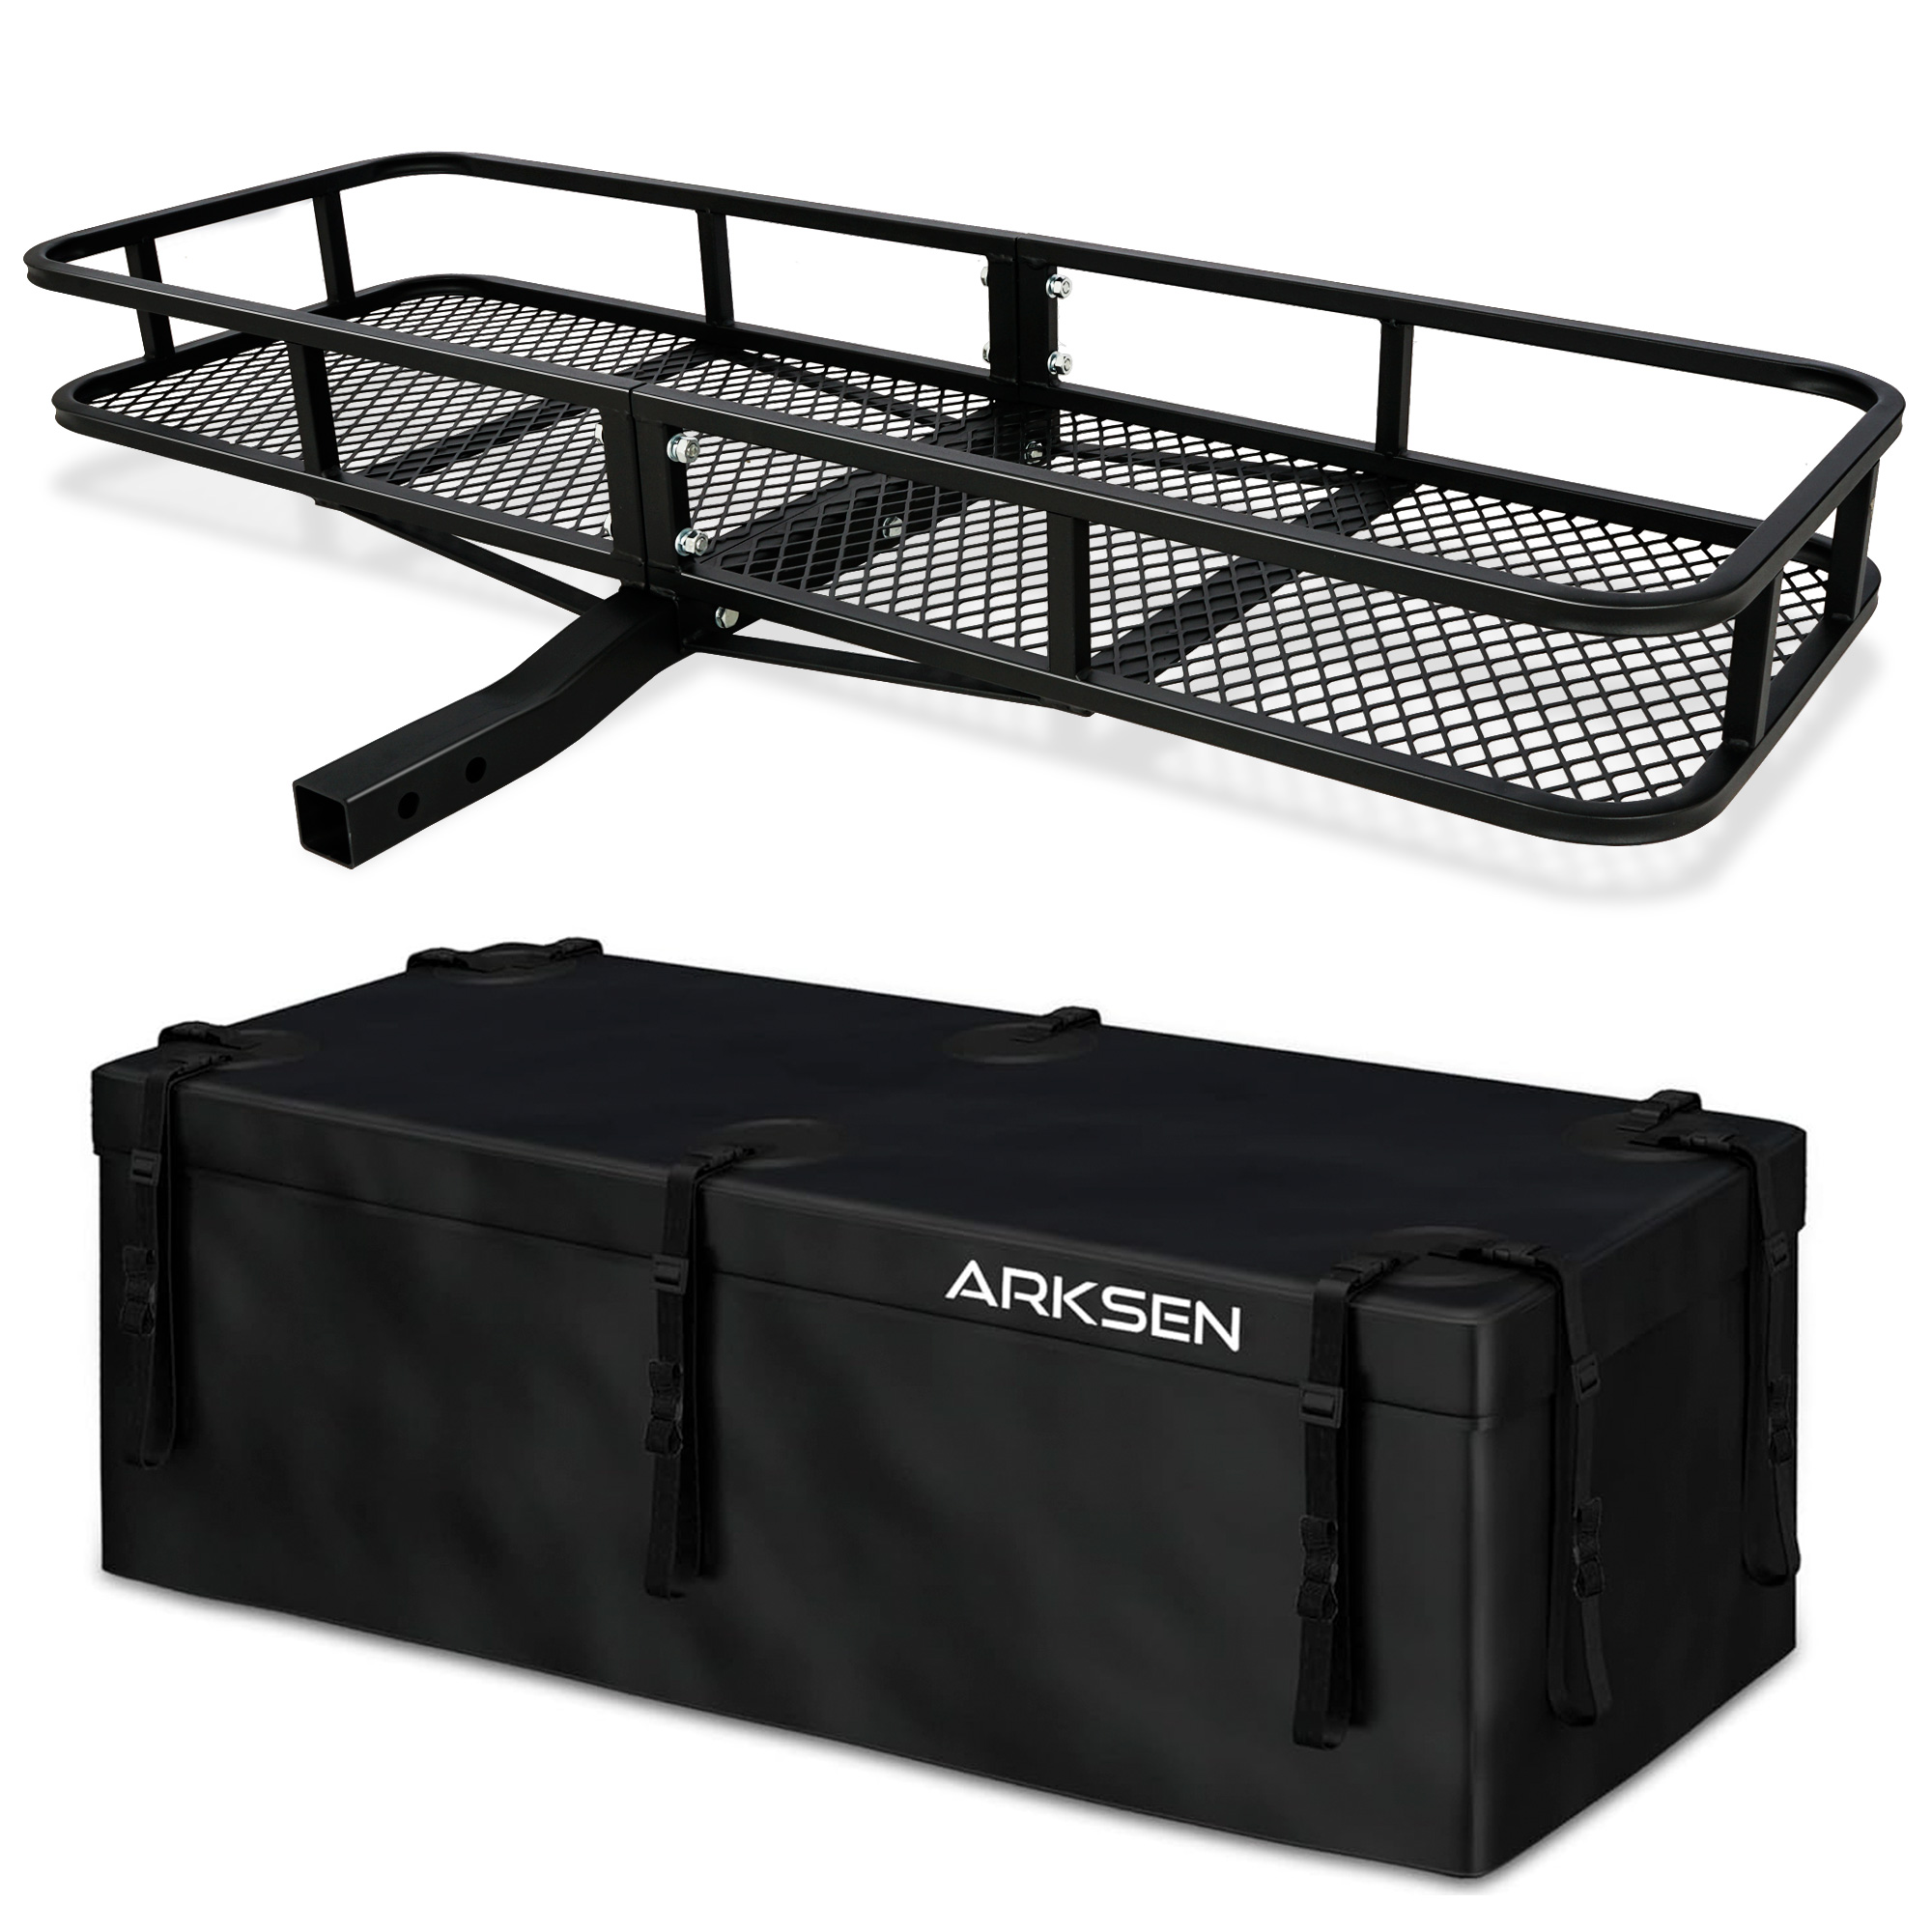 ARKSEN 60" x 20" x 6" Angled Shank Hitch Mount Cargo Carrier Luggage Basket Fit 2" Receiver, 500LBS Capacity, With Updated 500D PVC Waterproof Cargo Bag with Reinforced Straps, Black - image 1 of 6